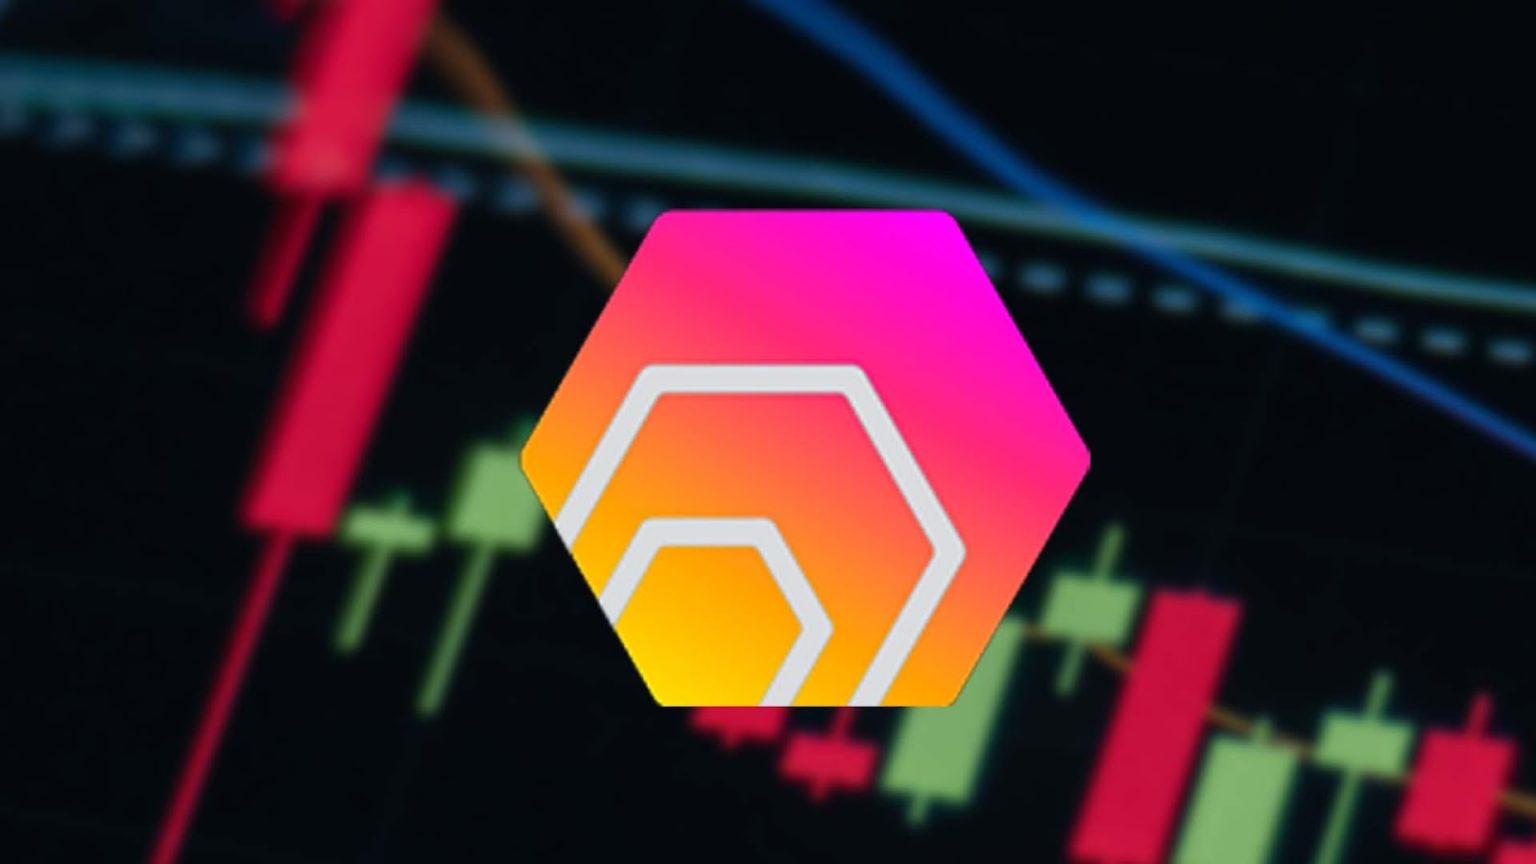 hex crypto currency price